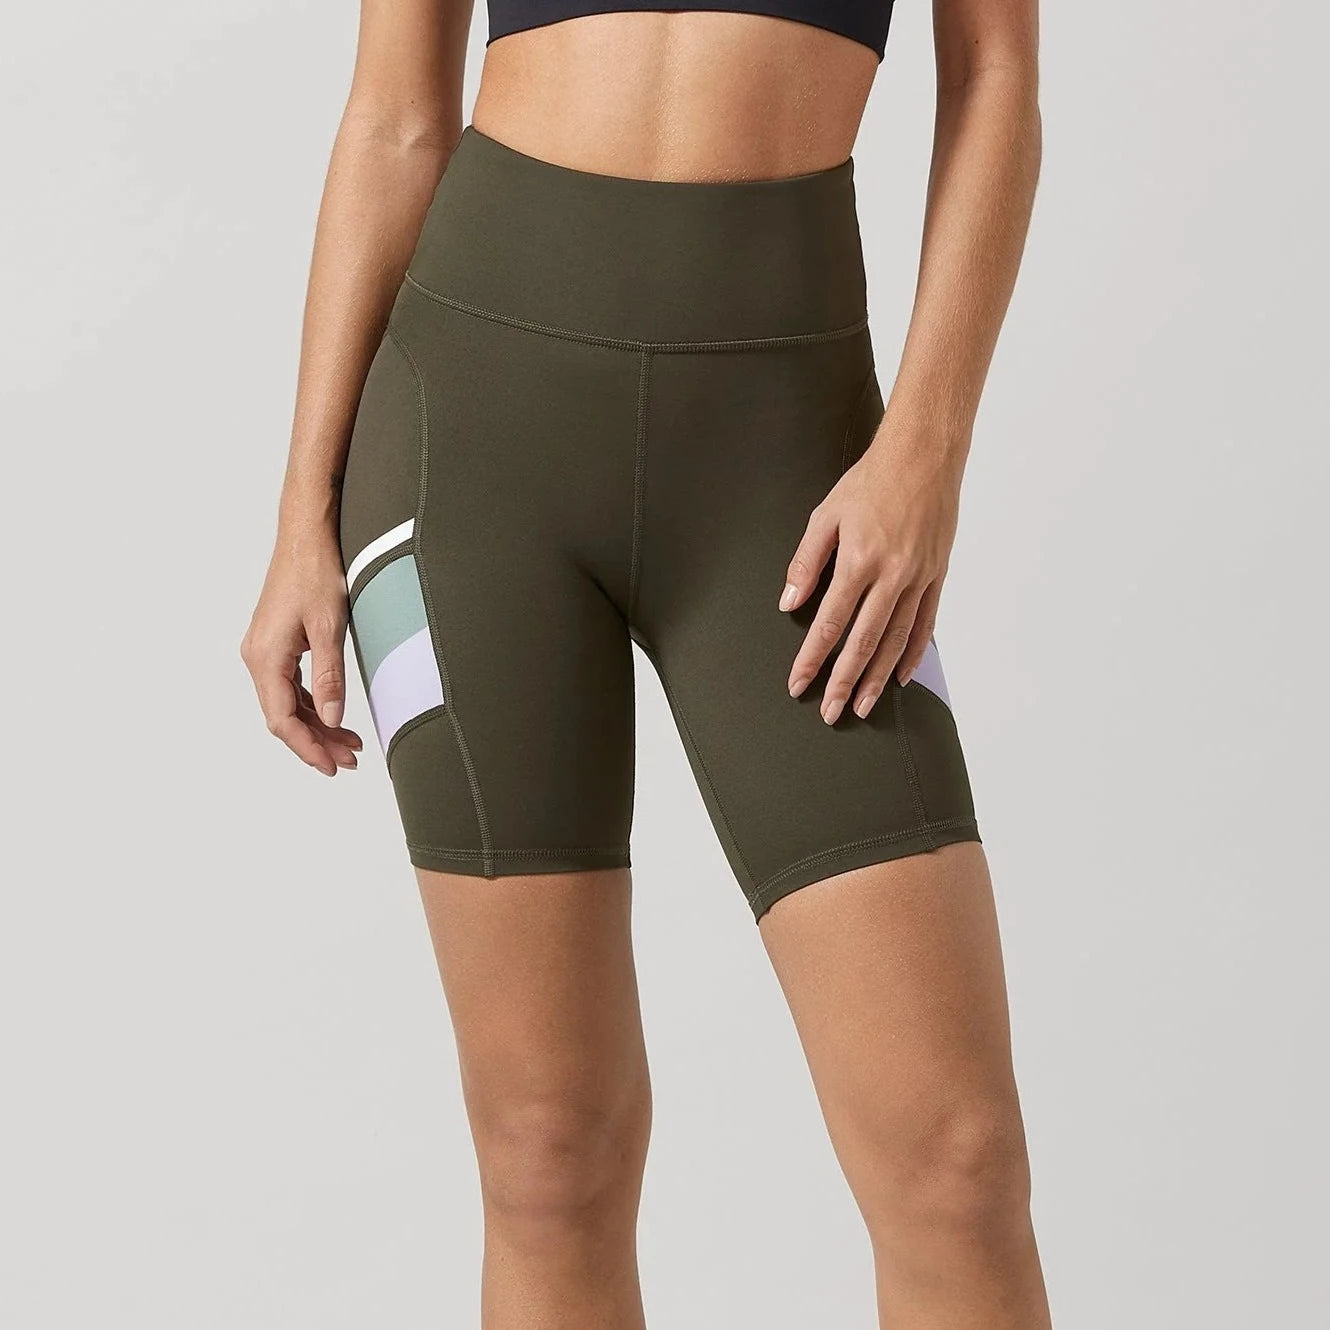 Tilly 7 Bike Shorts in Olive – Coach & I Lifestyle